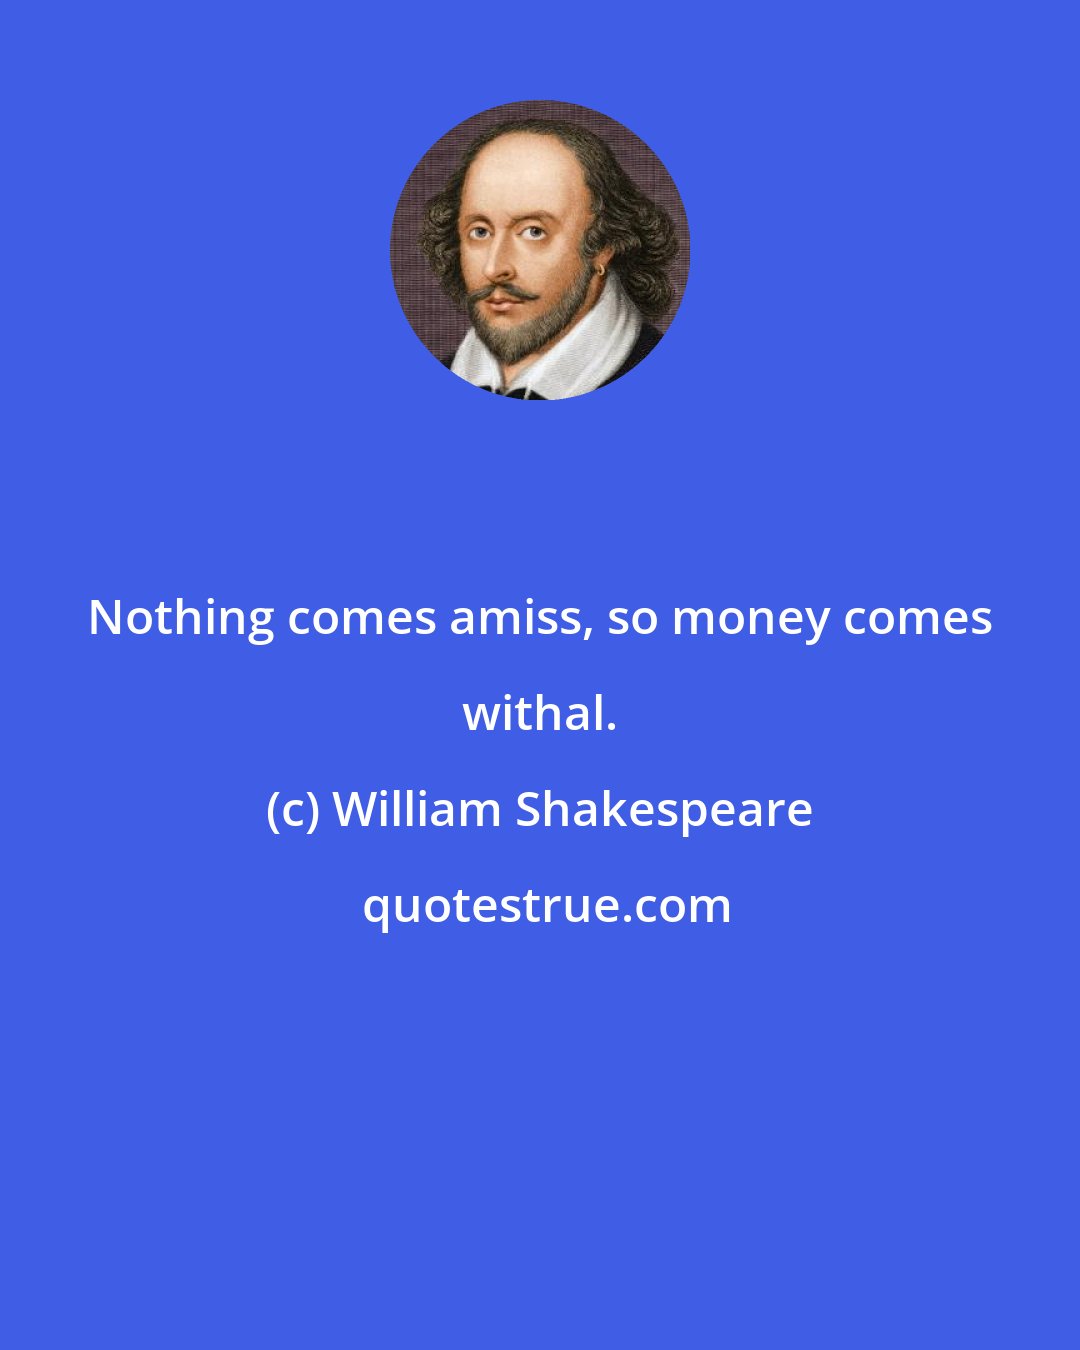 William Shakespeare: Nothing comes amiss, so money comes withal.